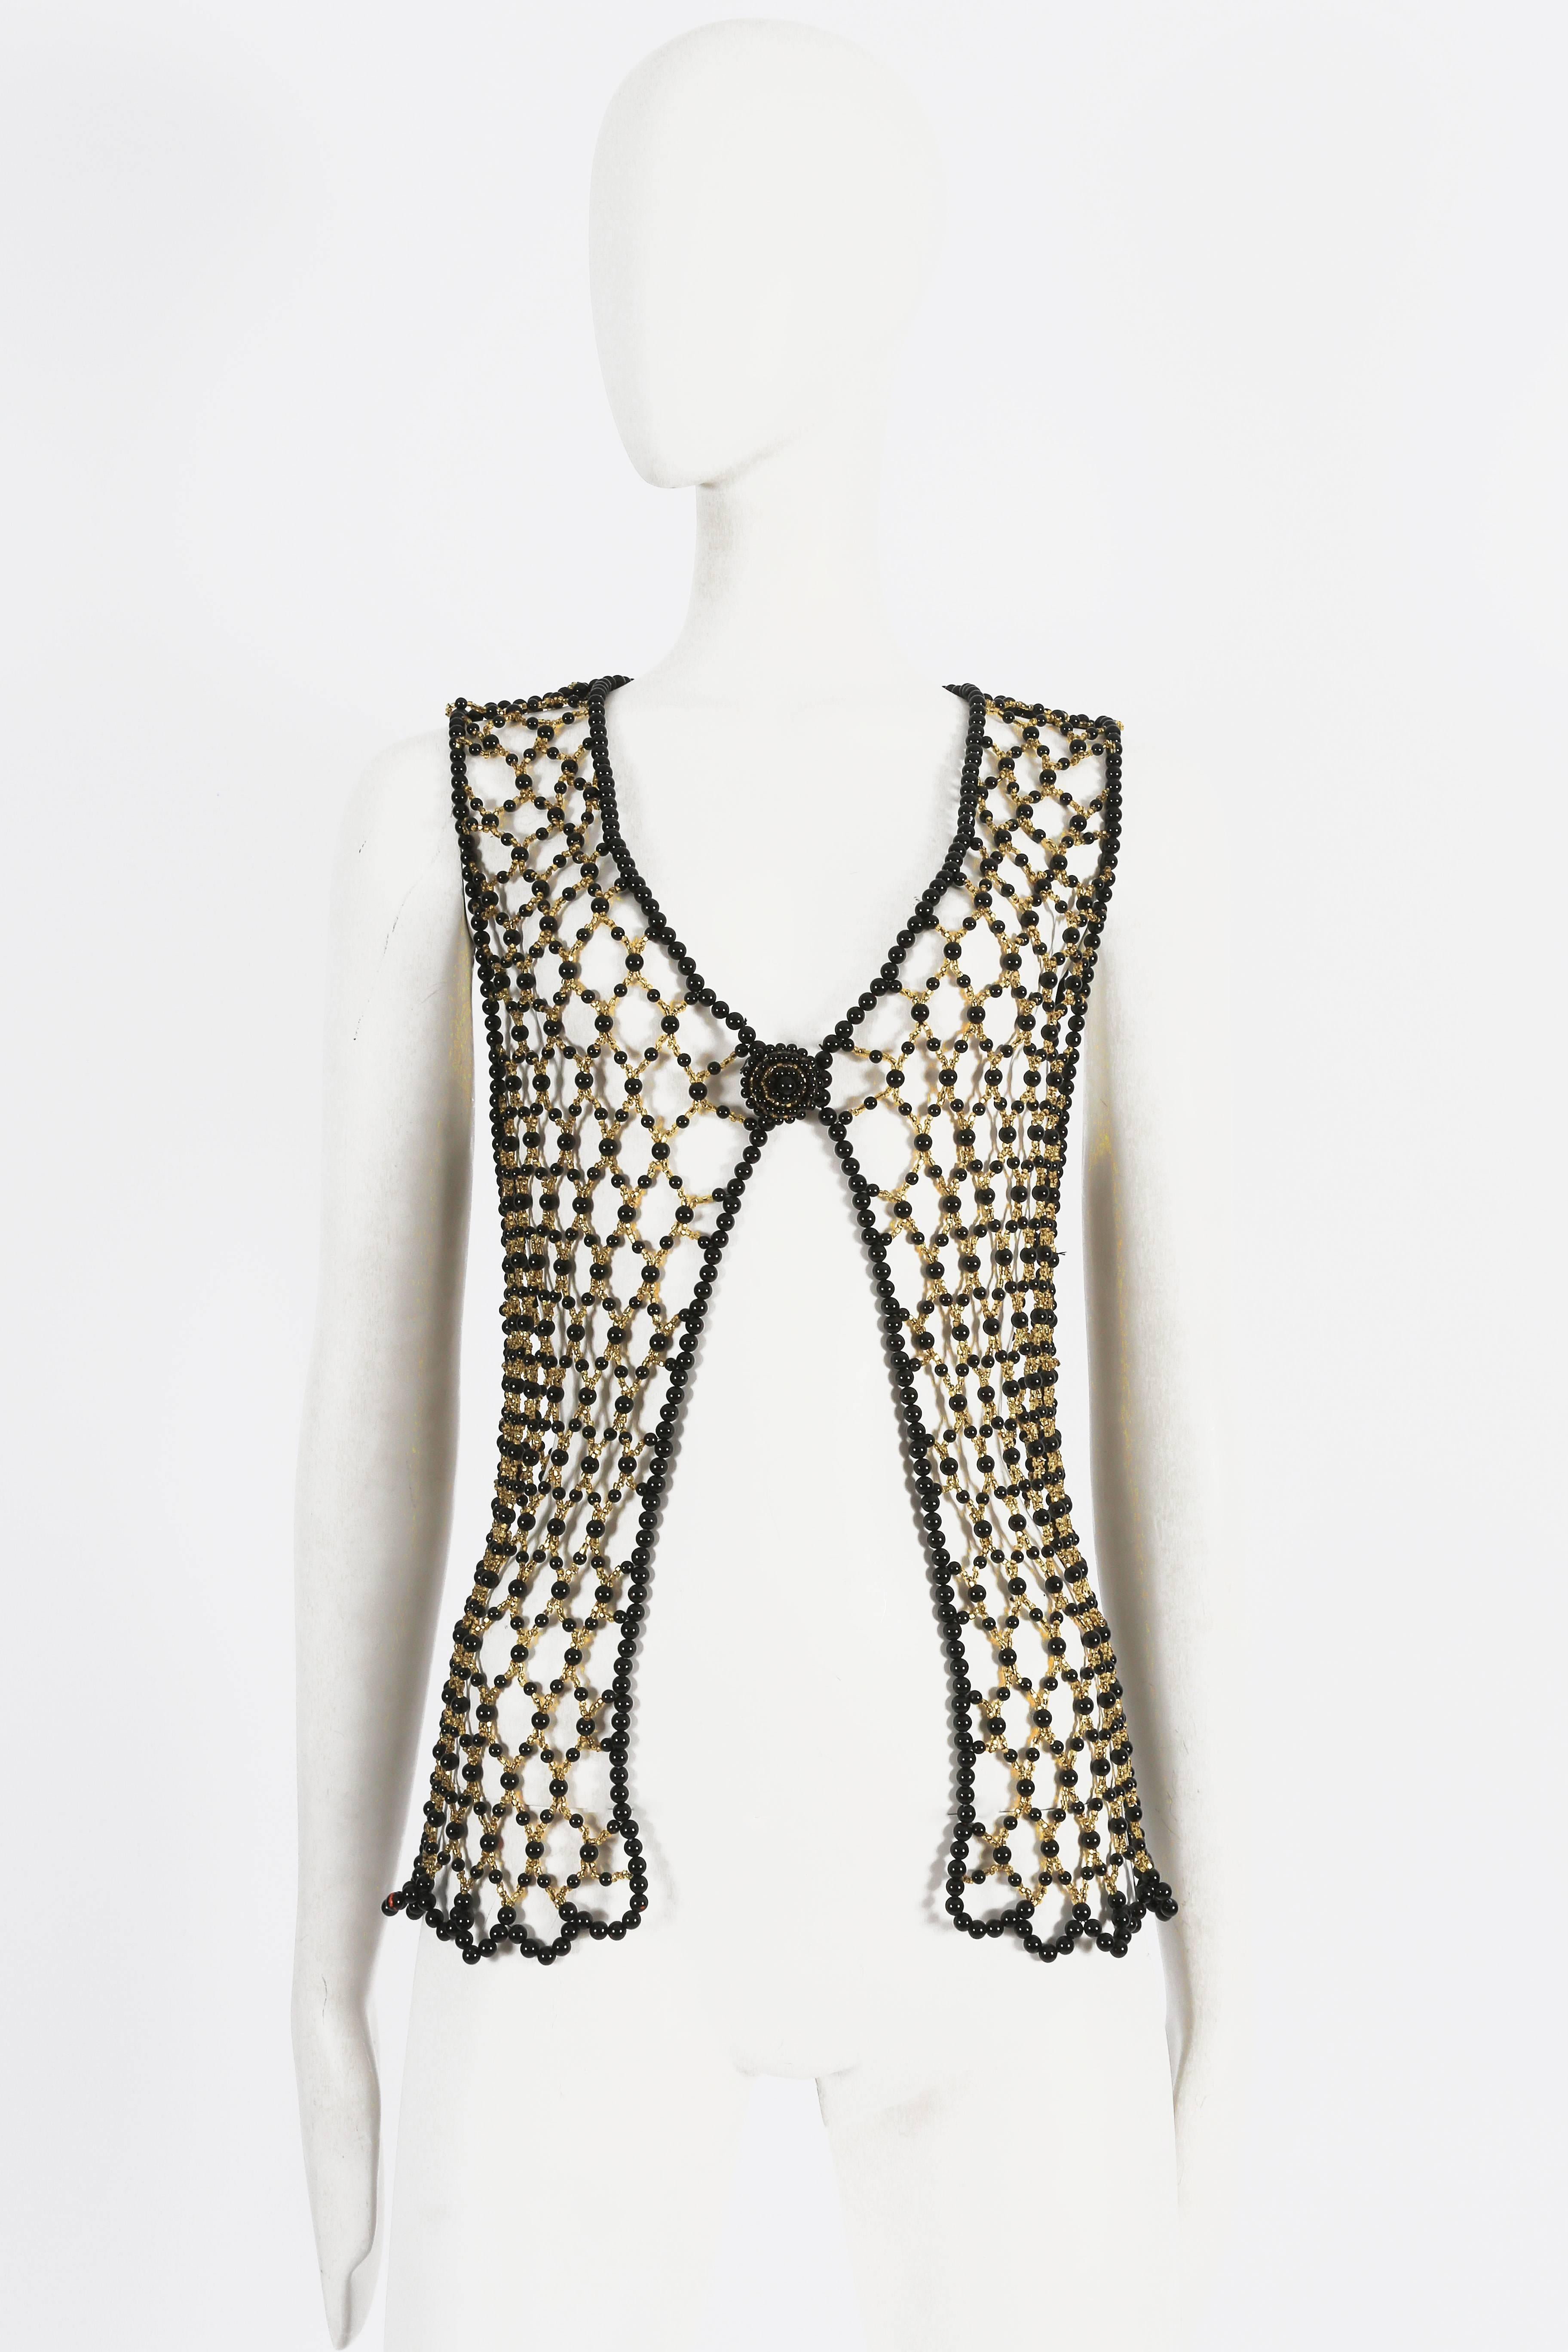 Beige Black and gold beaded net evening gillet, circa 1960s